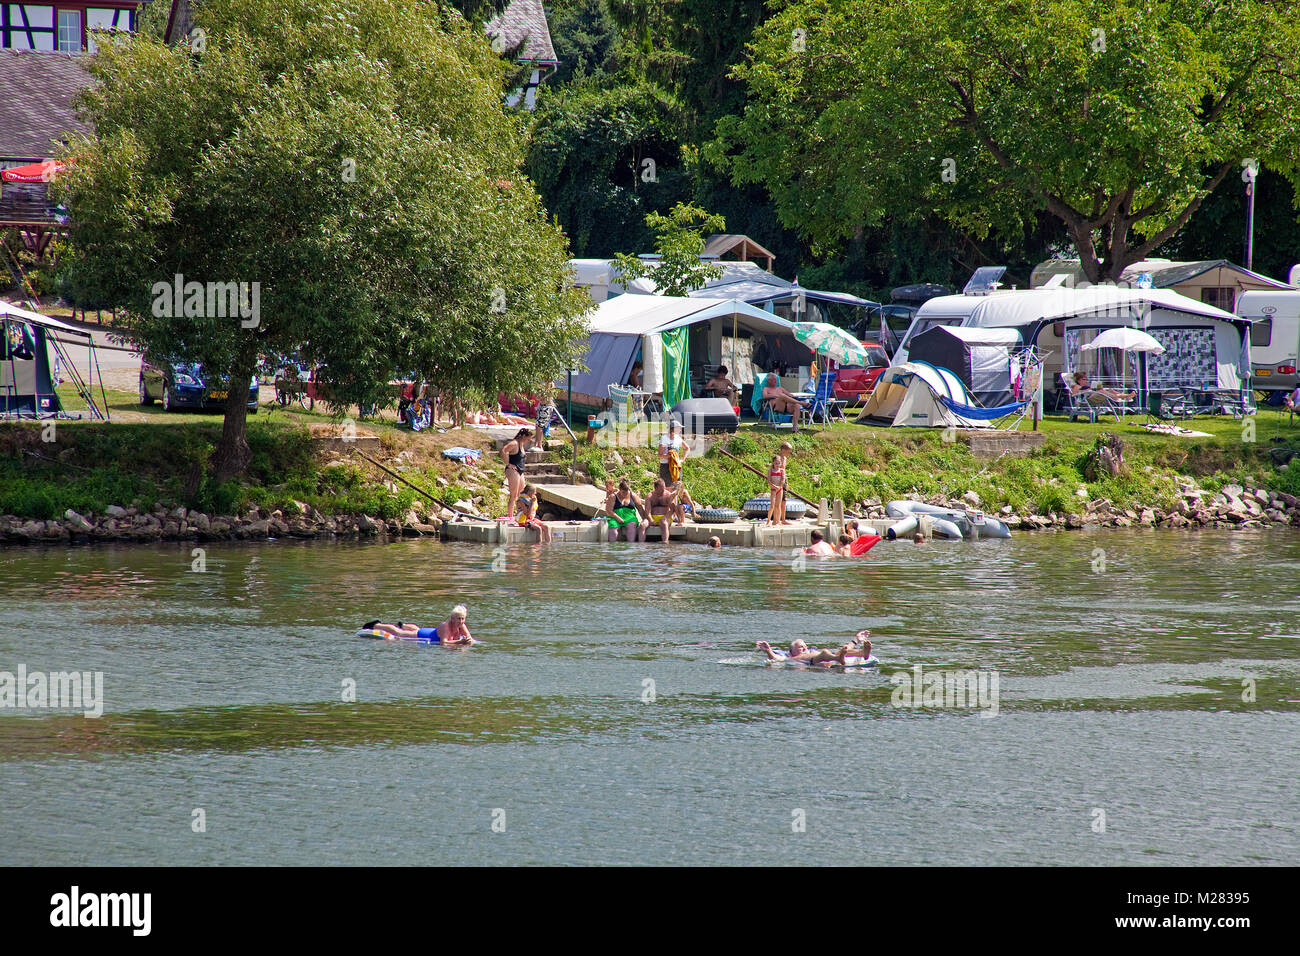 Camping ground at riverside, bathing in Moseller river, Wolf, Traben-Trarbach, Moselle river, Rhineland-Palatinate, Germany, Europe Stock Photo